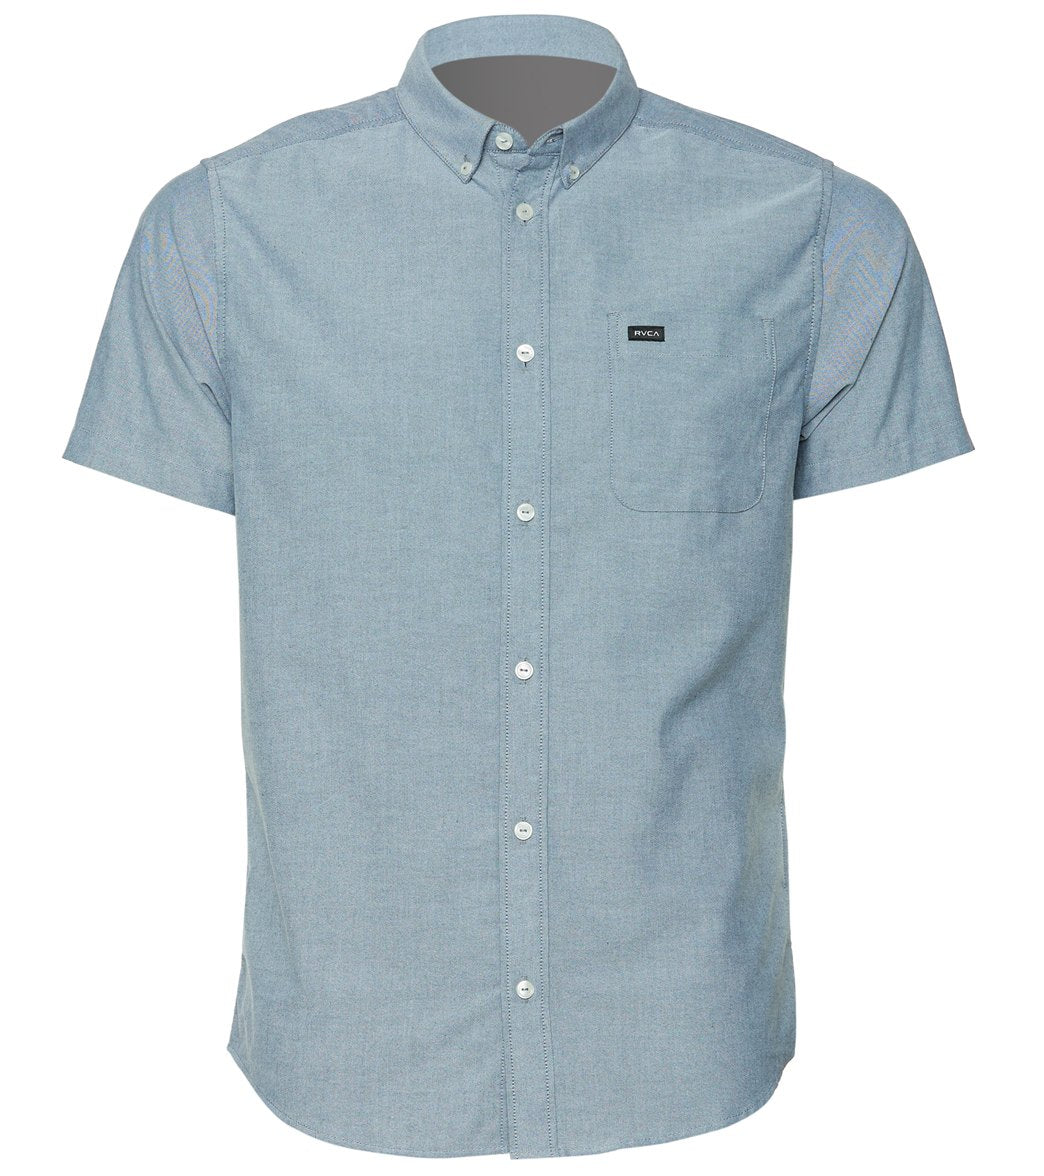 Rvca That'll Do Oxford Stretch Short Sleeve Shirt - Distant Blue Medium Cotton/Polyester - Swimoutlet.com